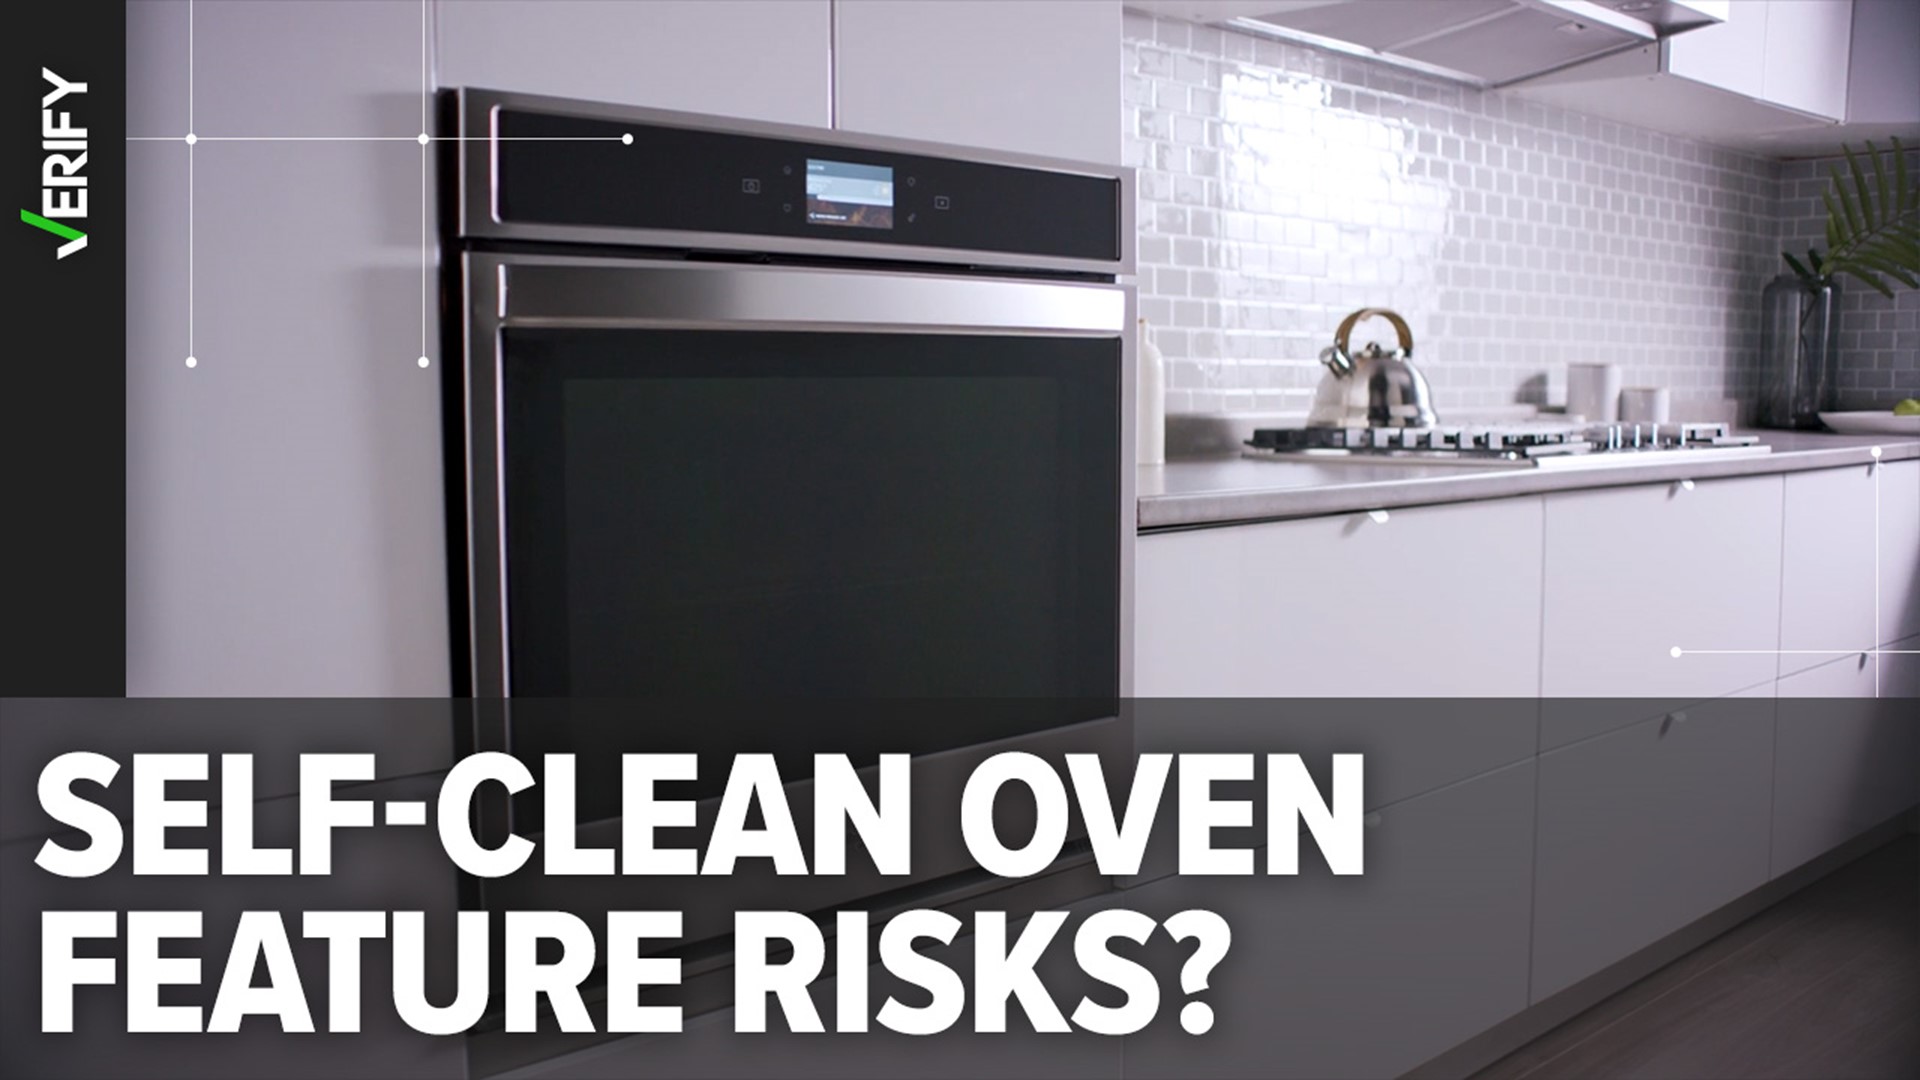 Not following instructions carefully when using an oven’s self-cleaning feature could lead to oven damage, exposure to smoke and gas, or a fire.